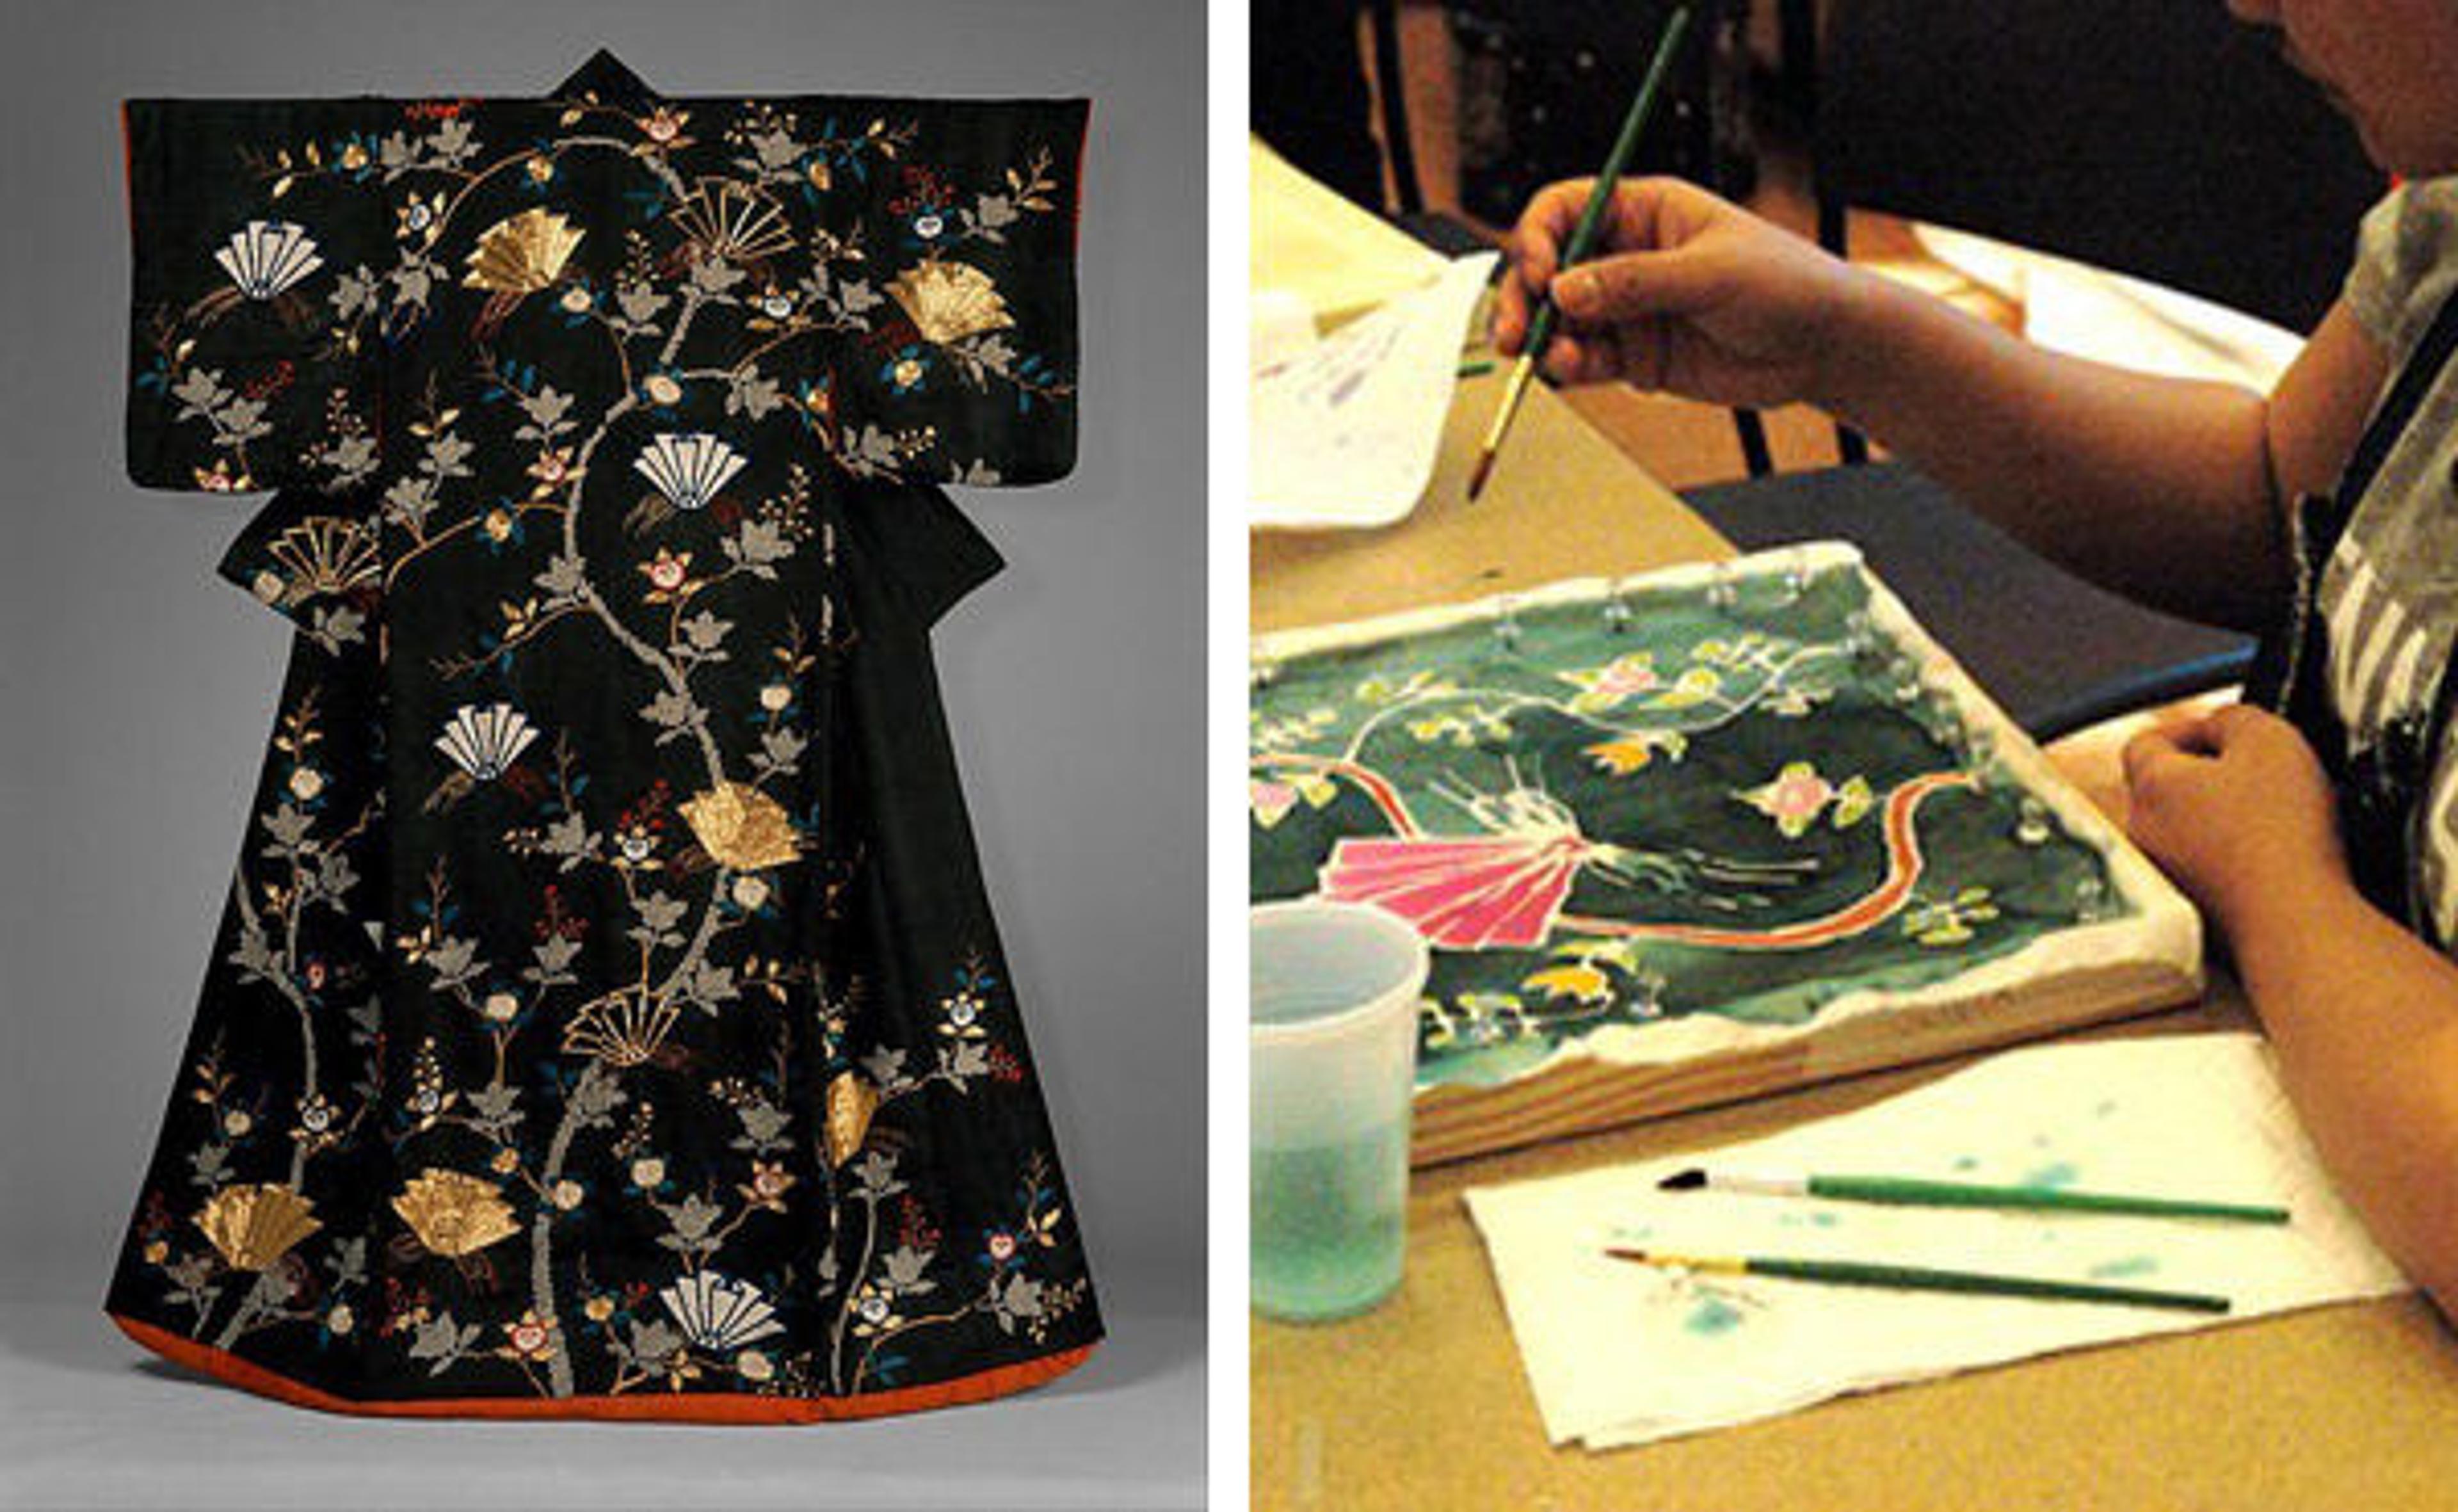 Left: Outer Robe (Uchikake) with Mandarin Oranges and Folded-Paper Butterflies, late 18th–early 19th century | Japan, Edo Period (1615–1868) | 1976.108 | Right: A student explores butterfly motifs during the Silk Painting: Kimono-Inspired Designs Studio Workshop. 